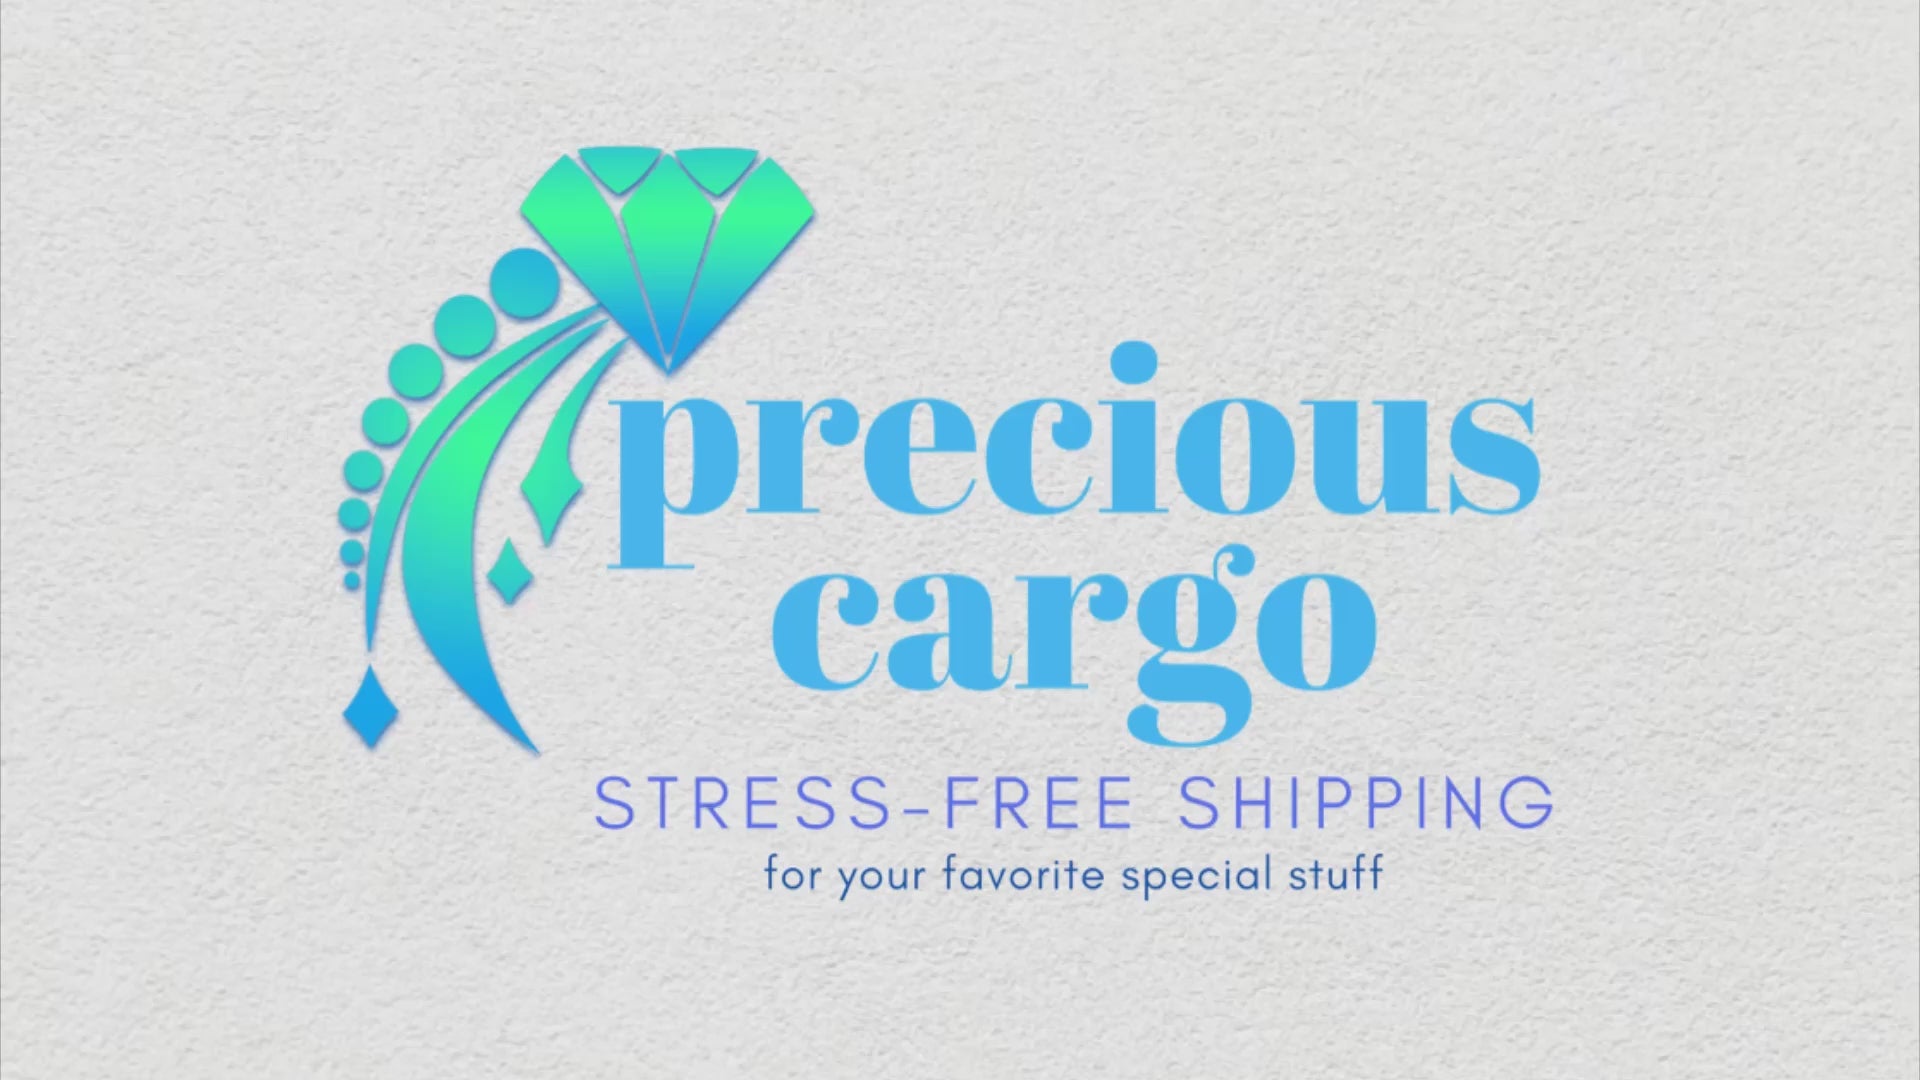 Load video: Video explaining how to properly package jewelry inside a Precious Cargo Stress Free Shipping Kit